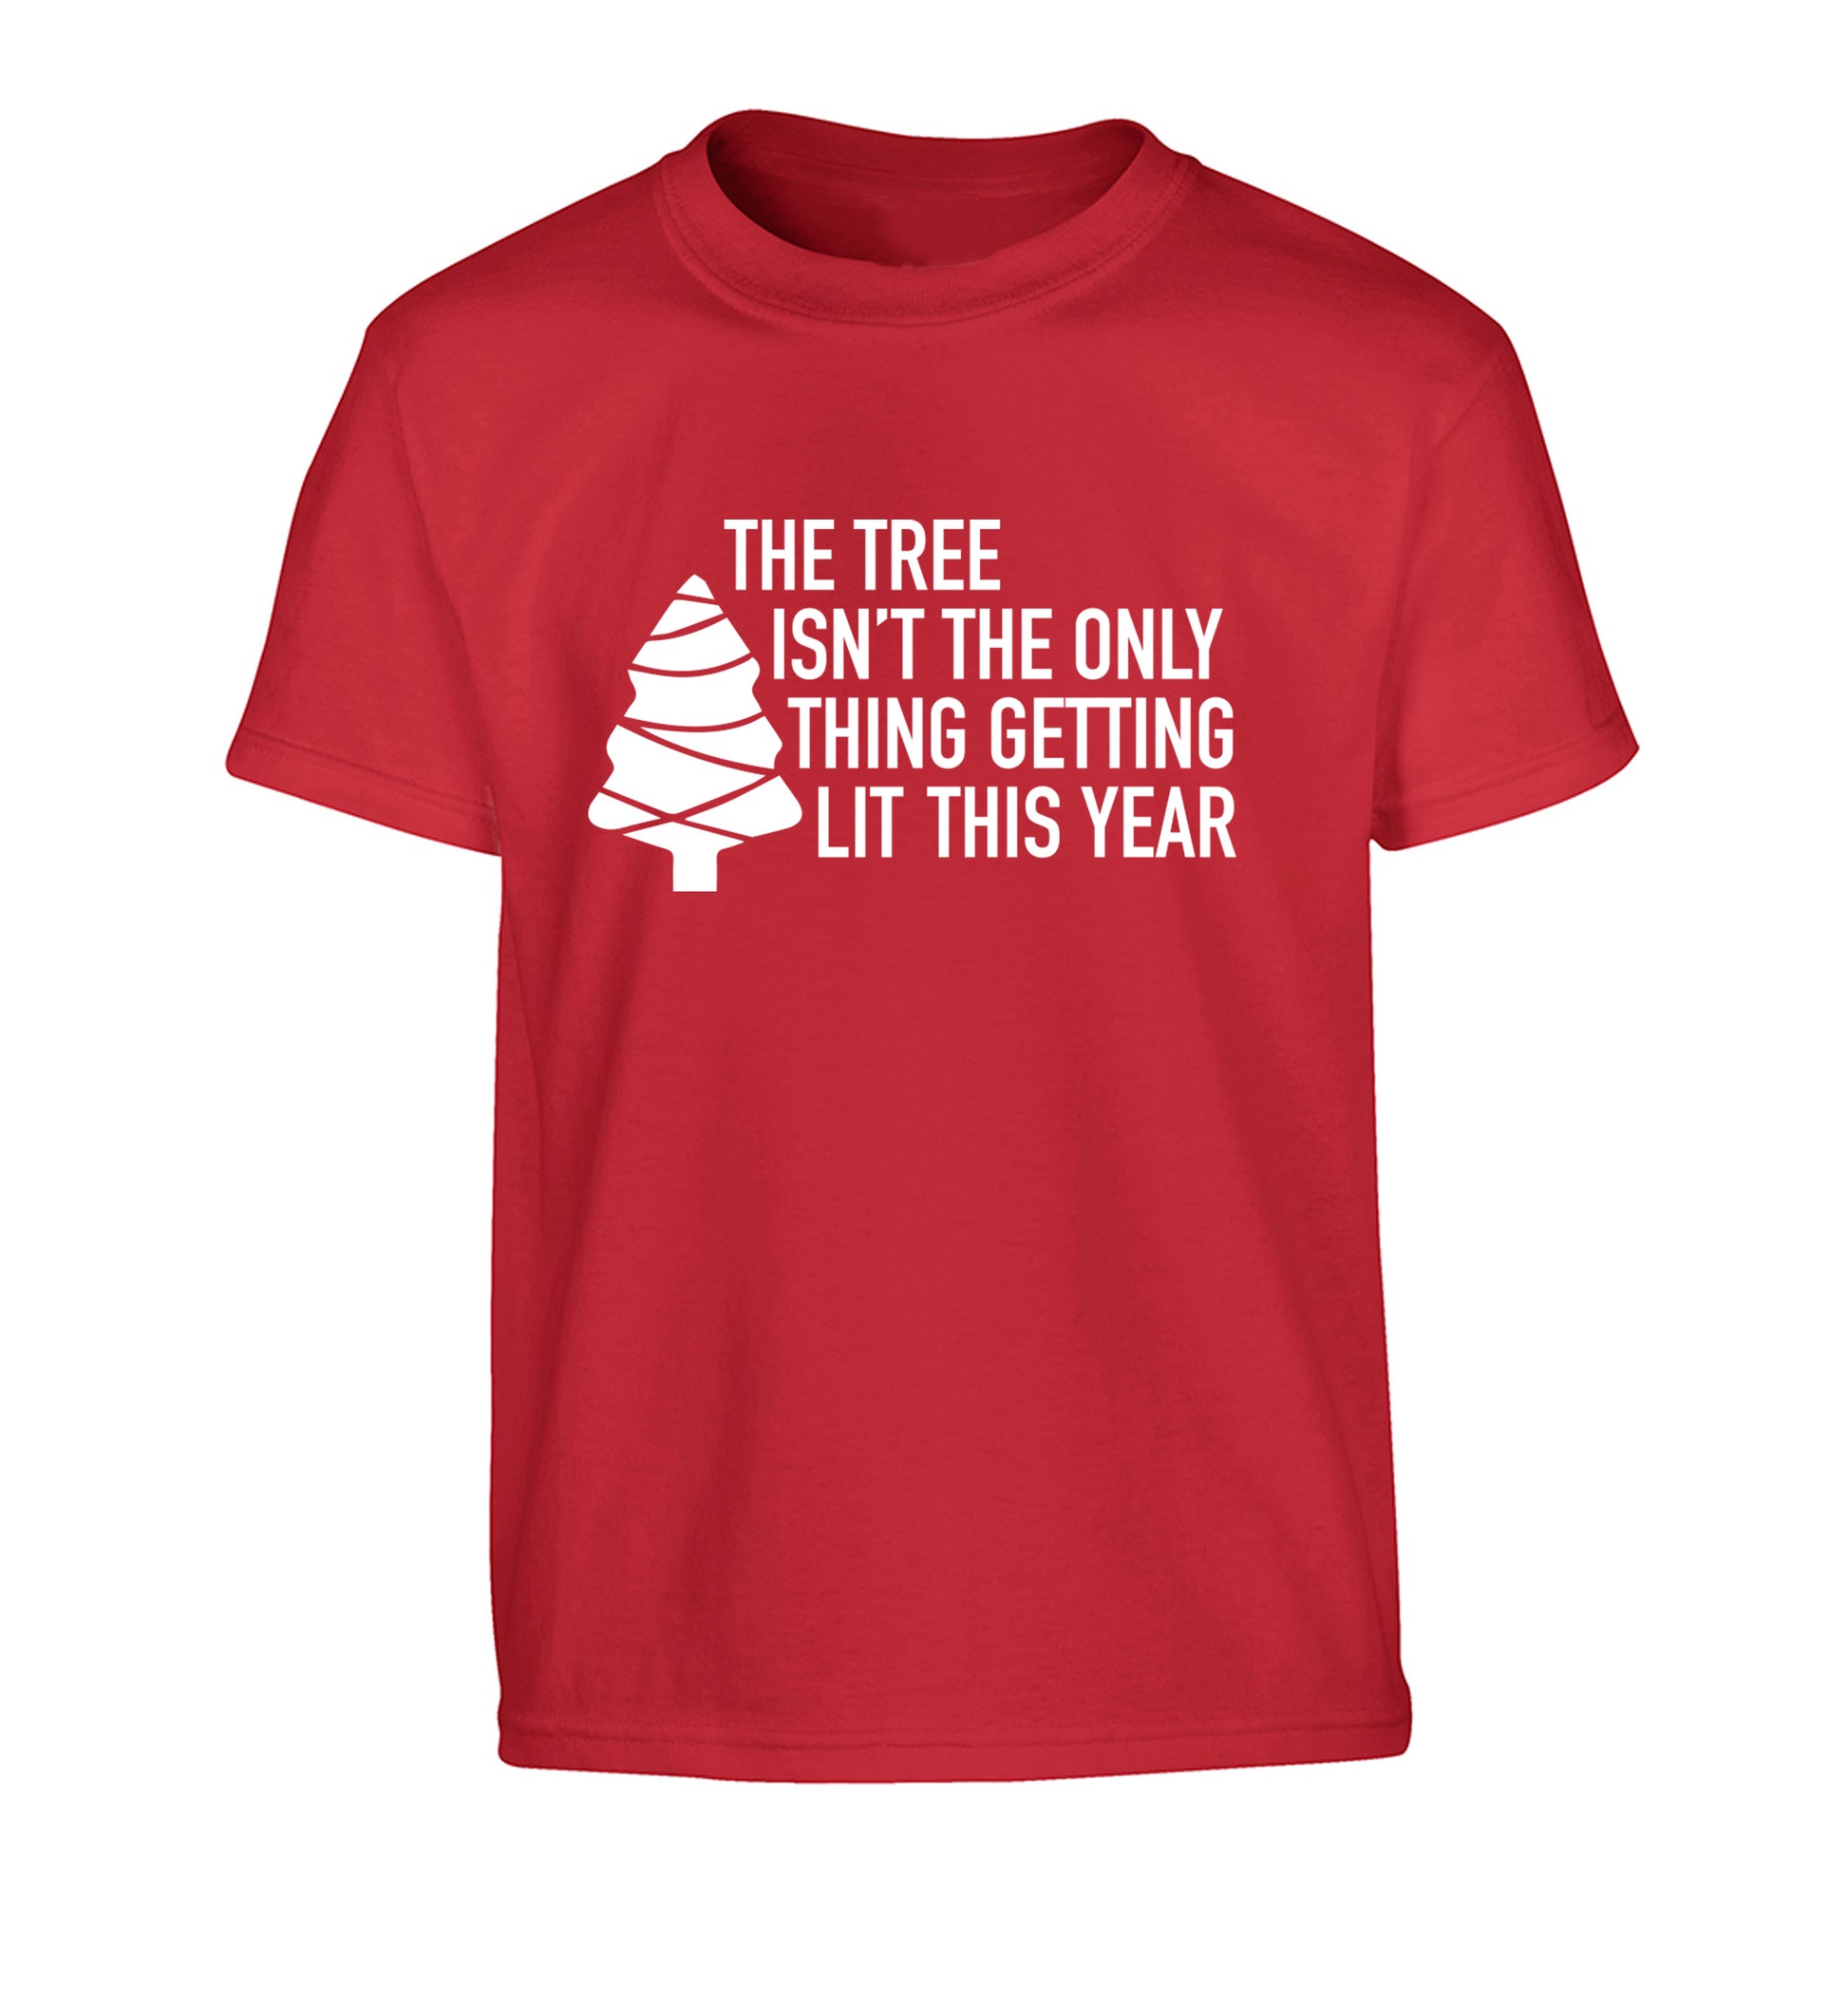 The tree isn't the only thing getting lit this year Children's red Tshirt 12-14 Years